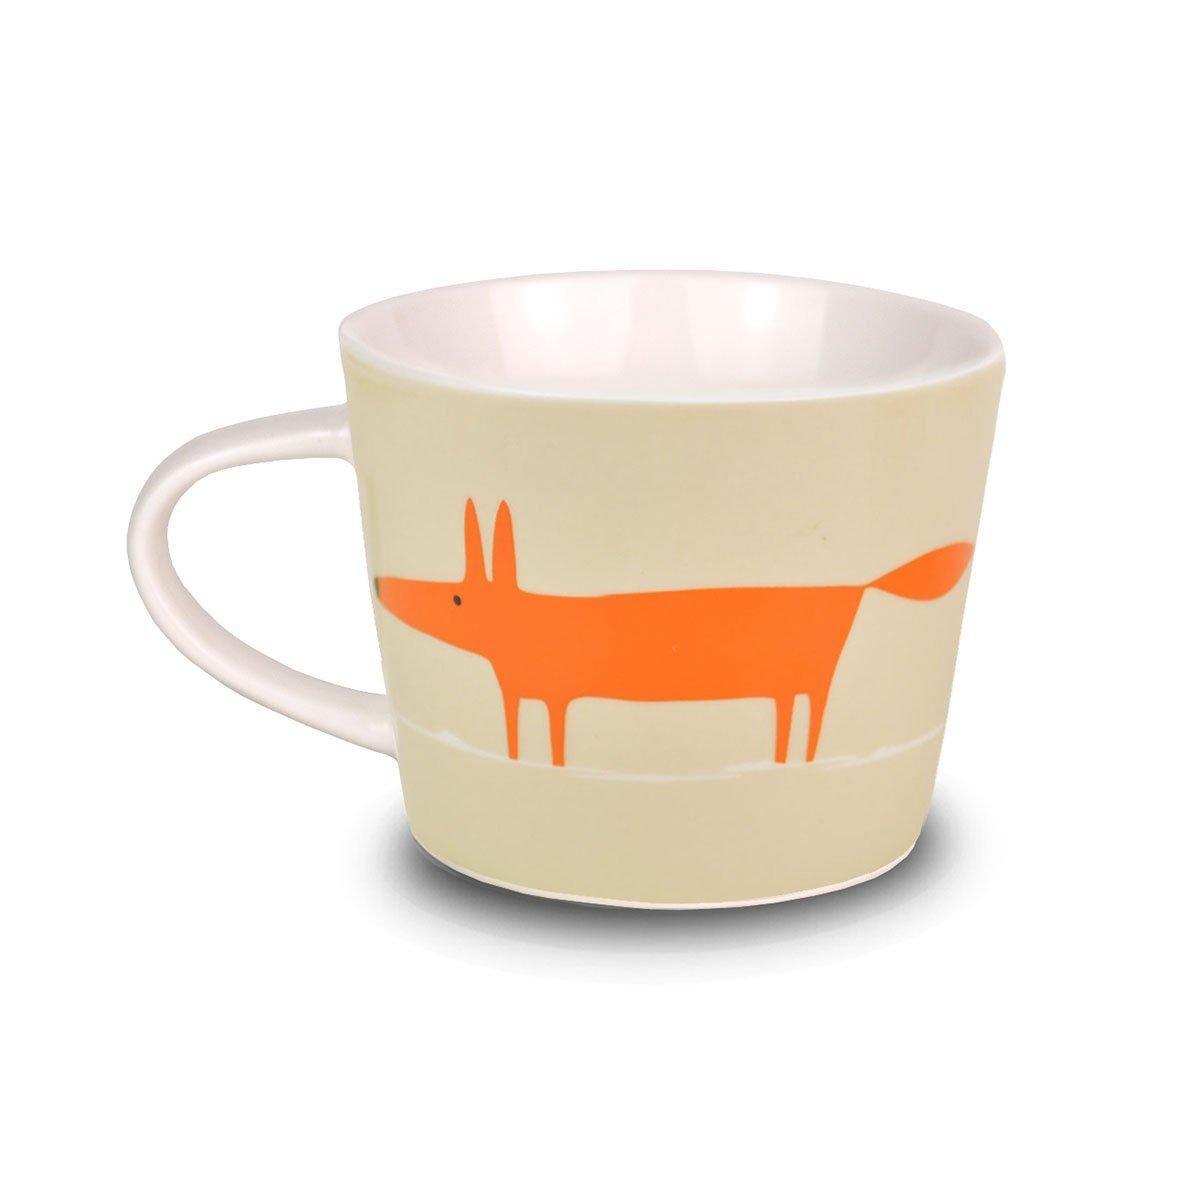  Mugs And Cups SC-0100 